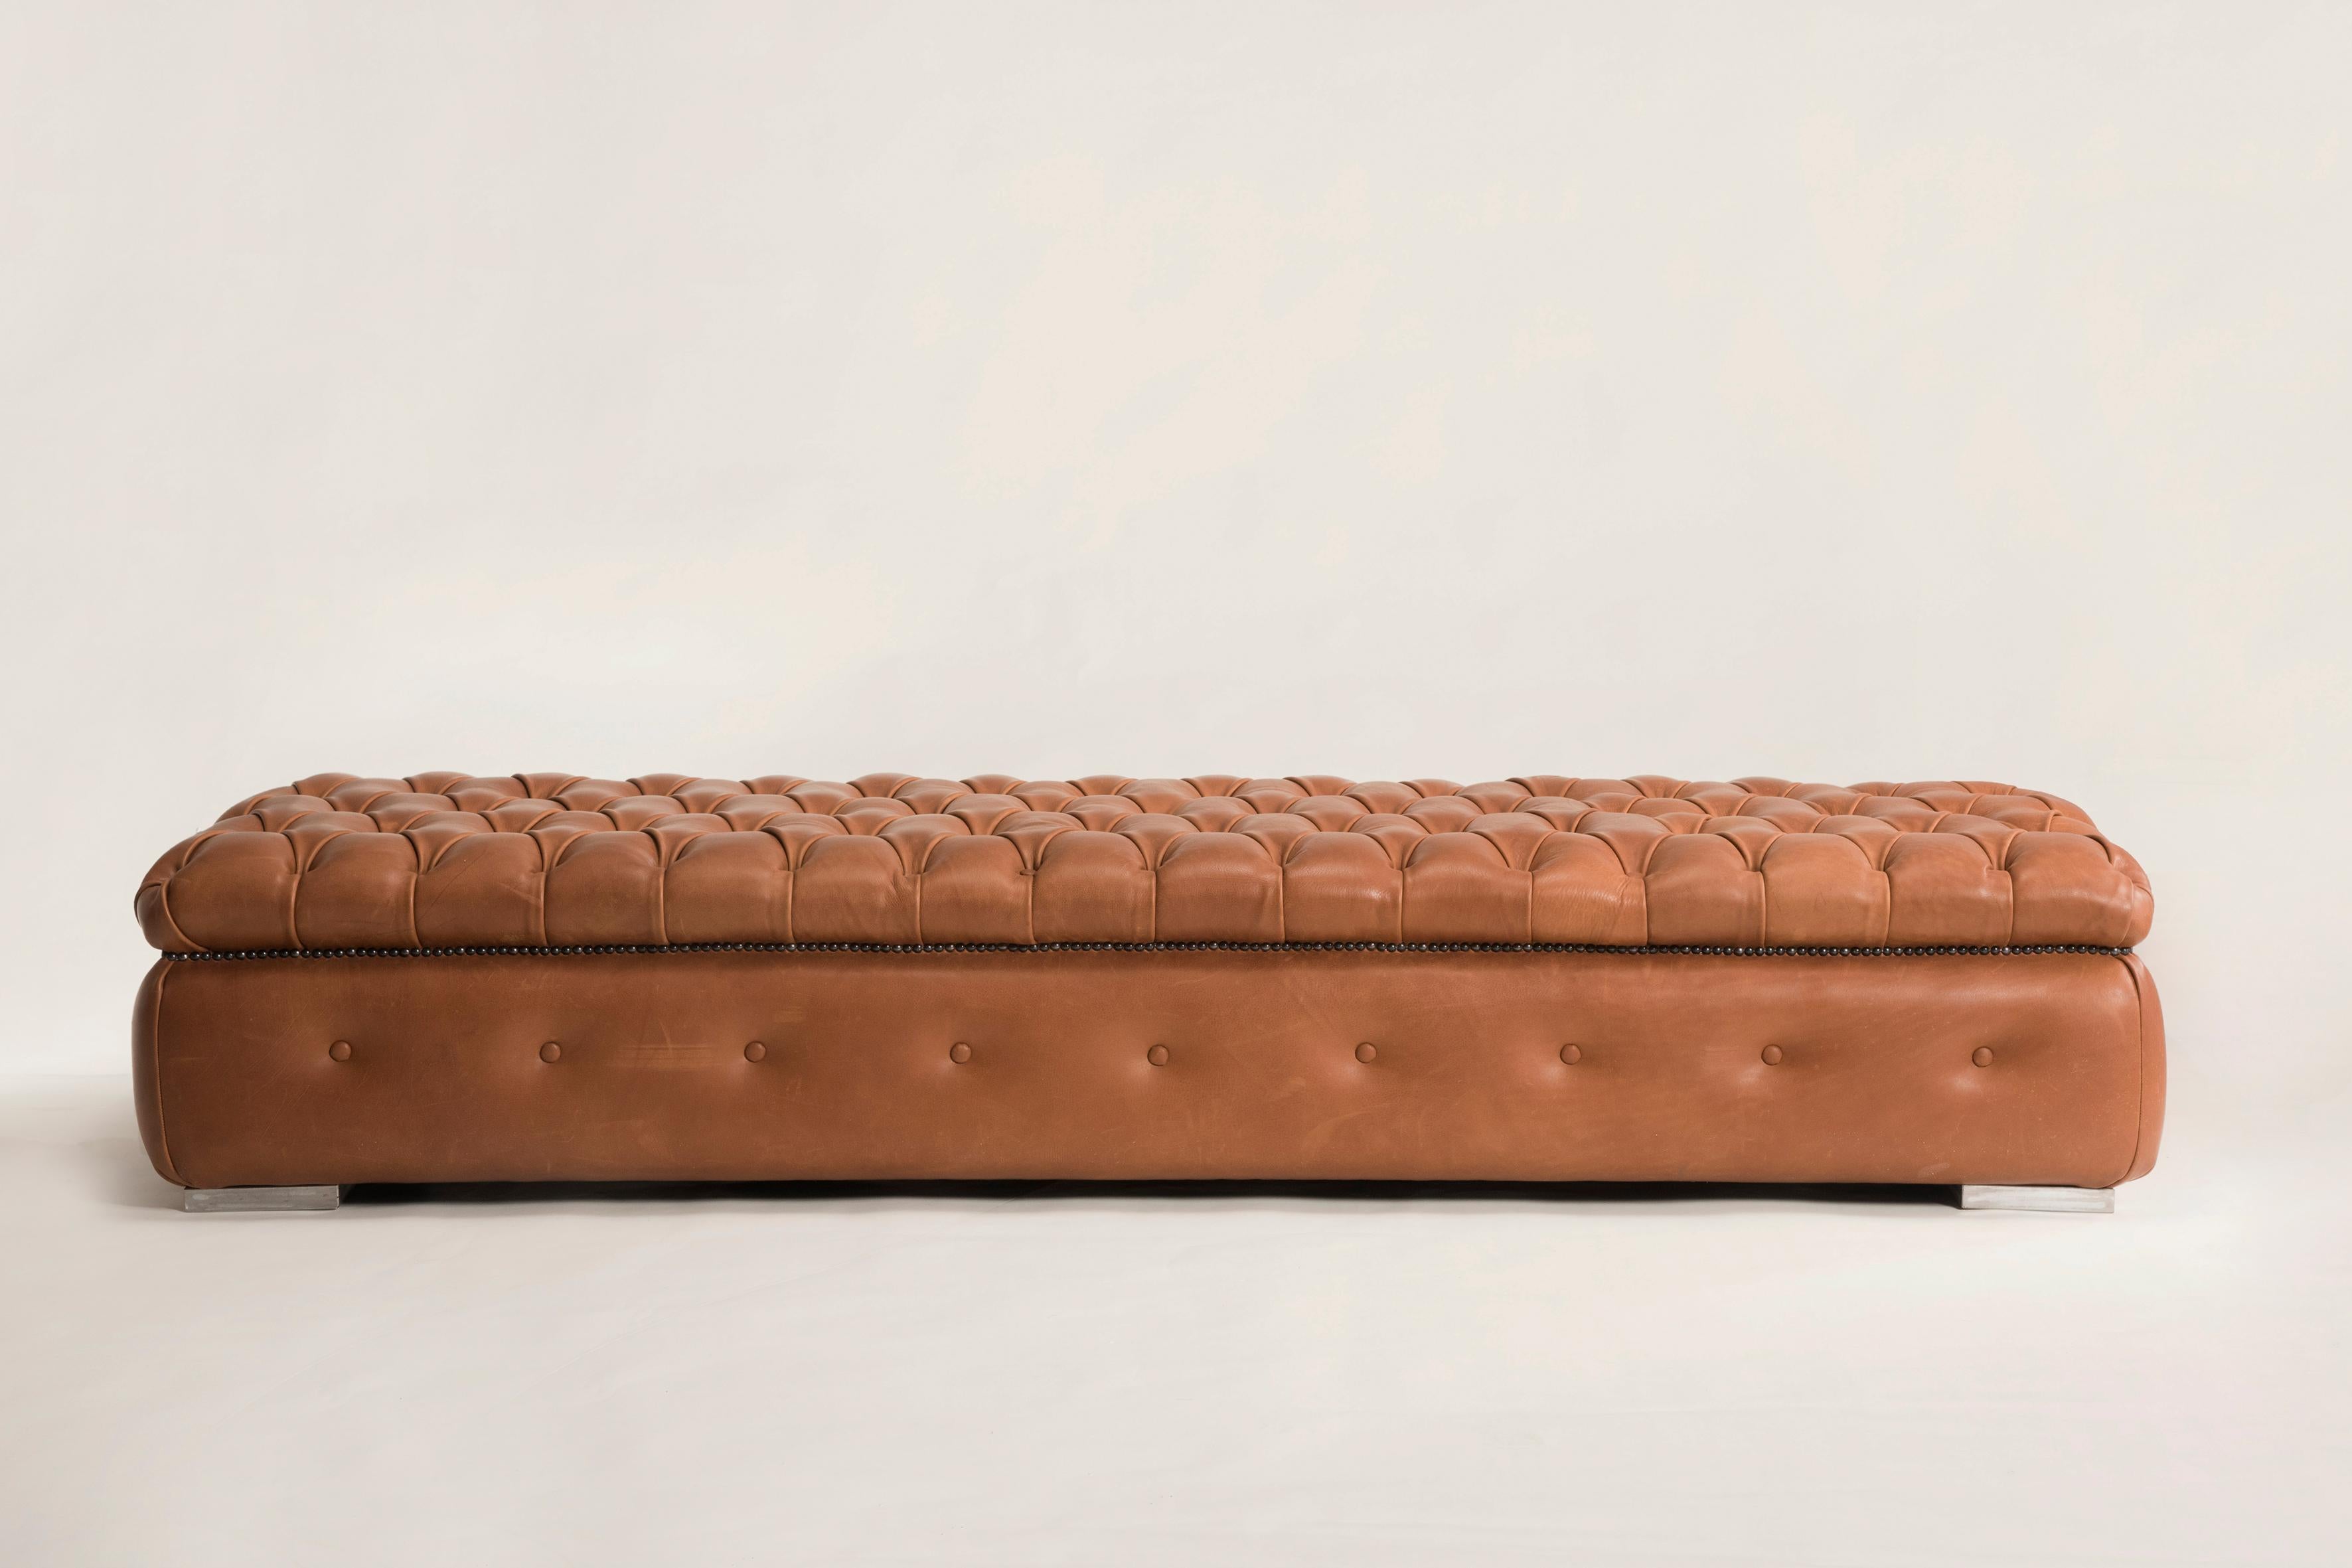 Italian Customizable Brown Leather Capitonné Pouf Available in other colors shape size